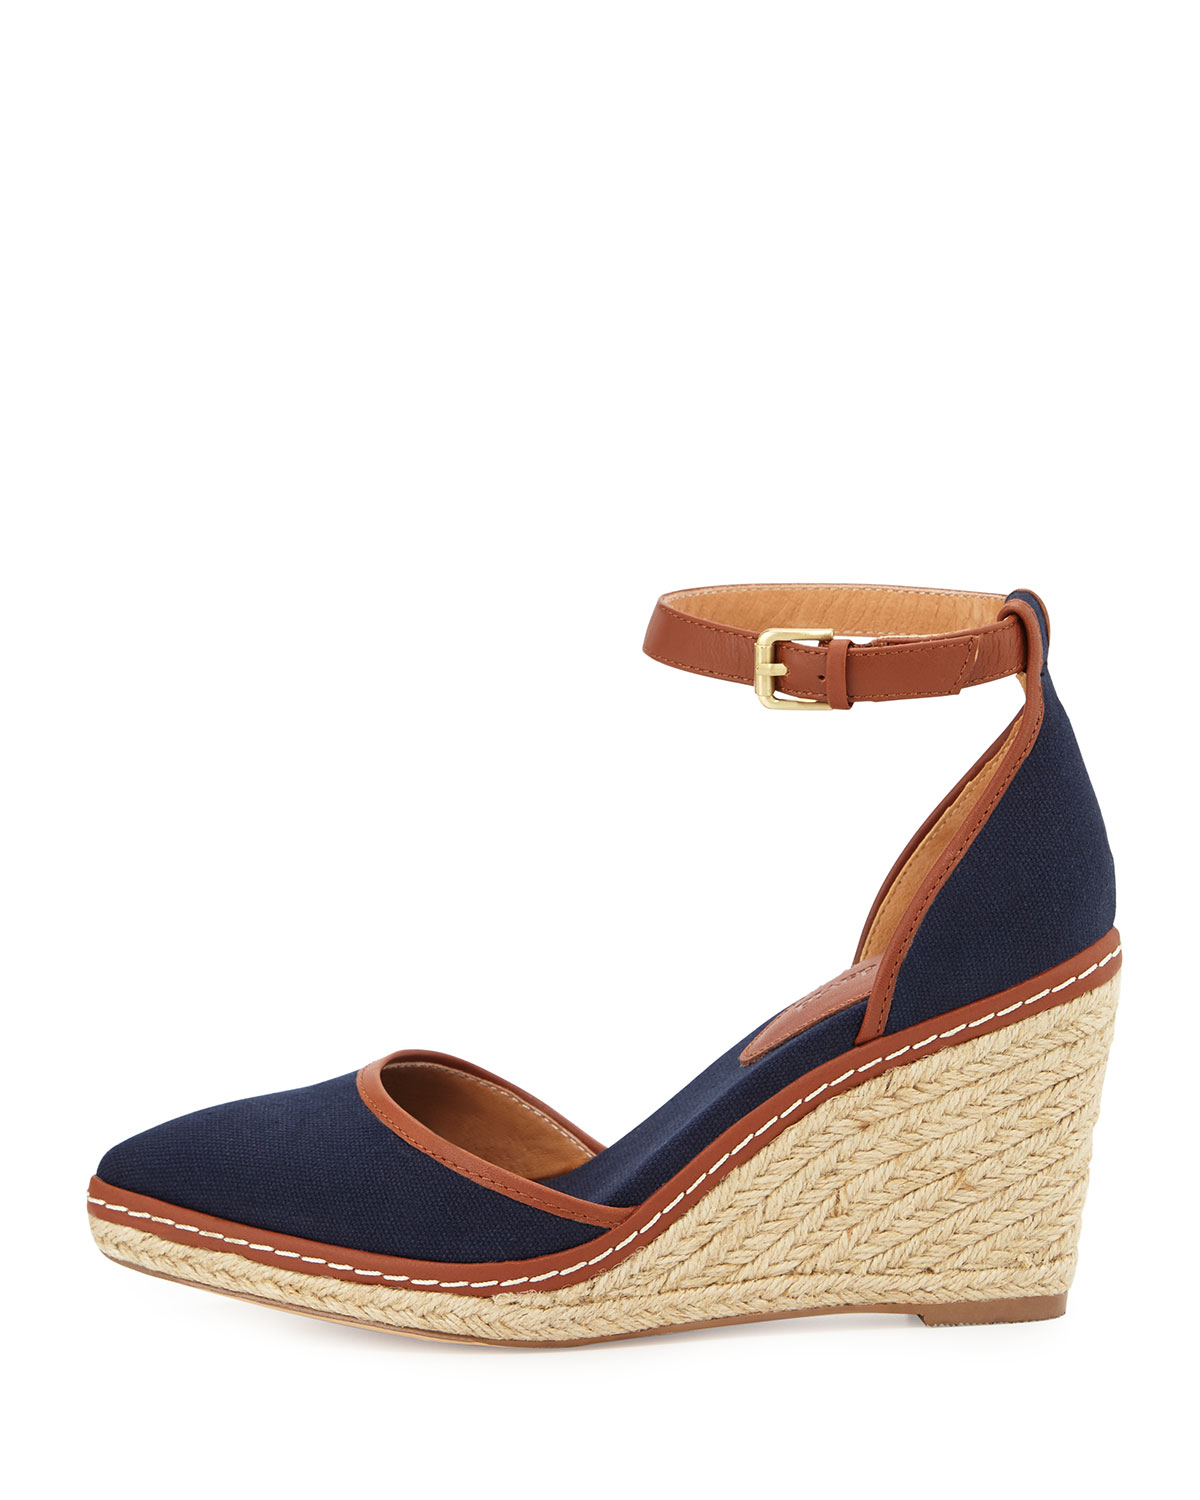 Charles David Keiko Closed-toe Canvas Espadrille Wedge in Brown - Lyst